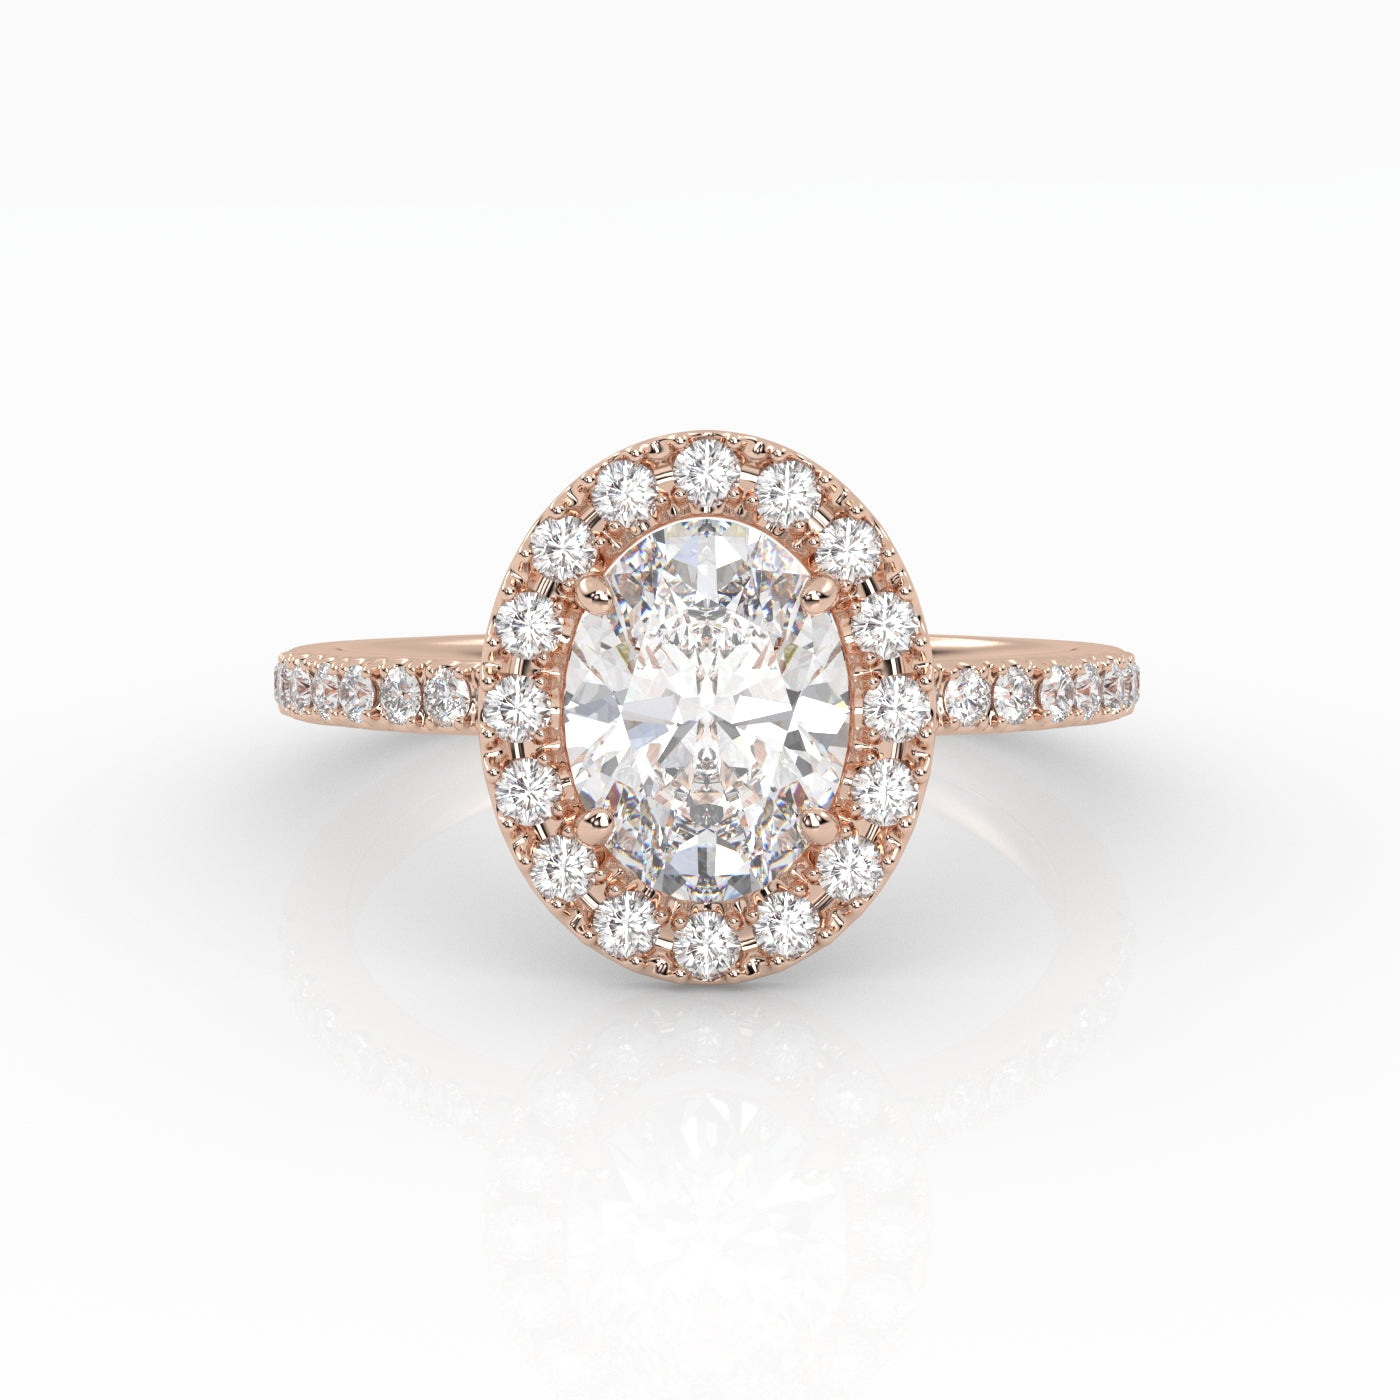 The Oval Solitaire with Pavé band and Halo